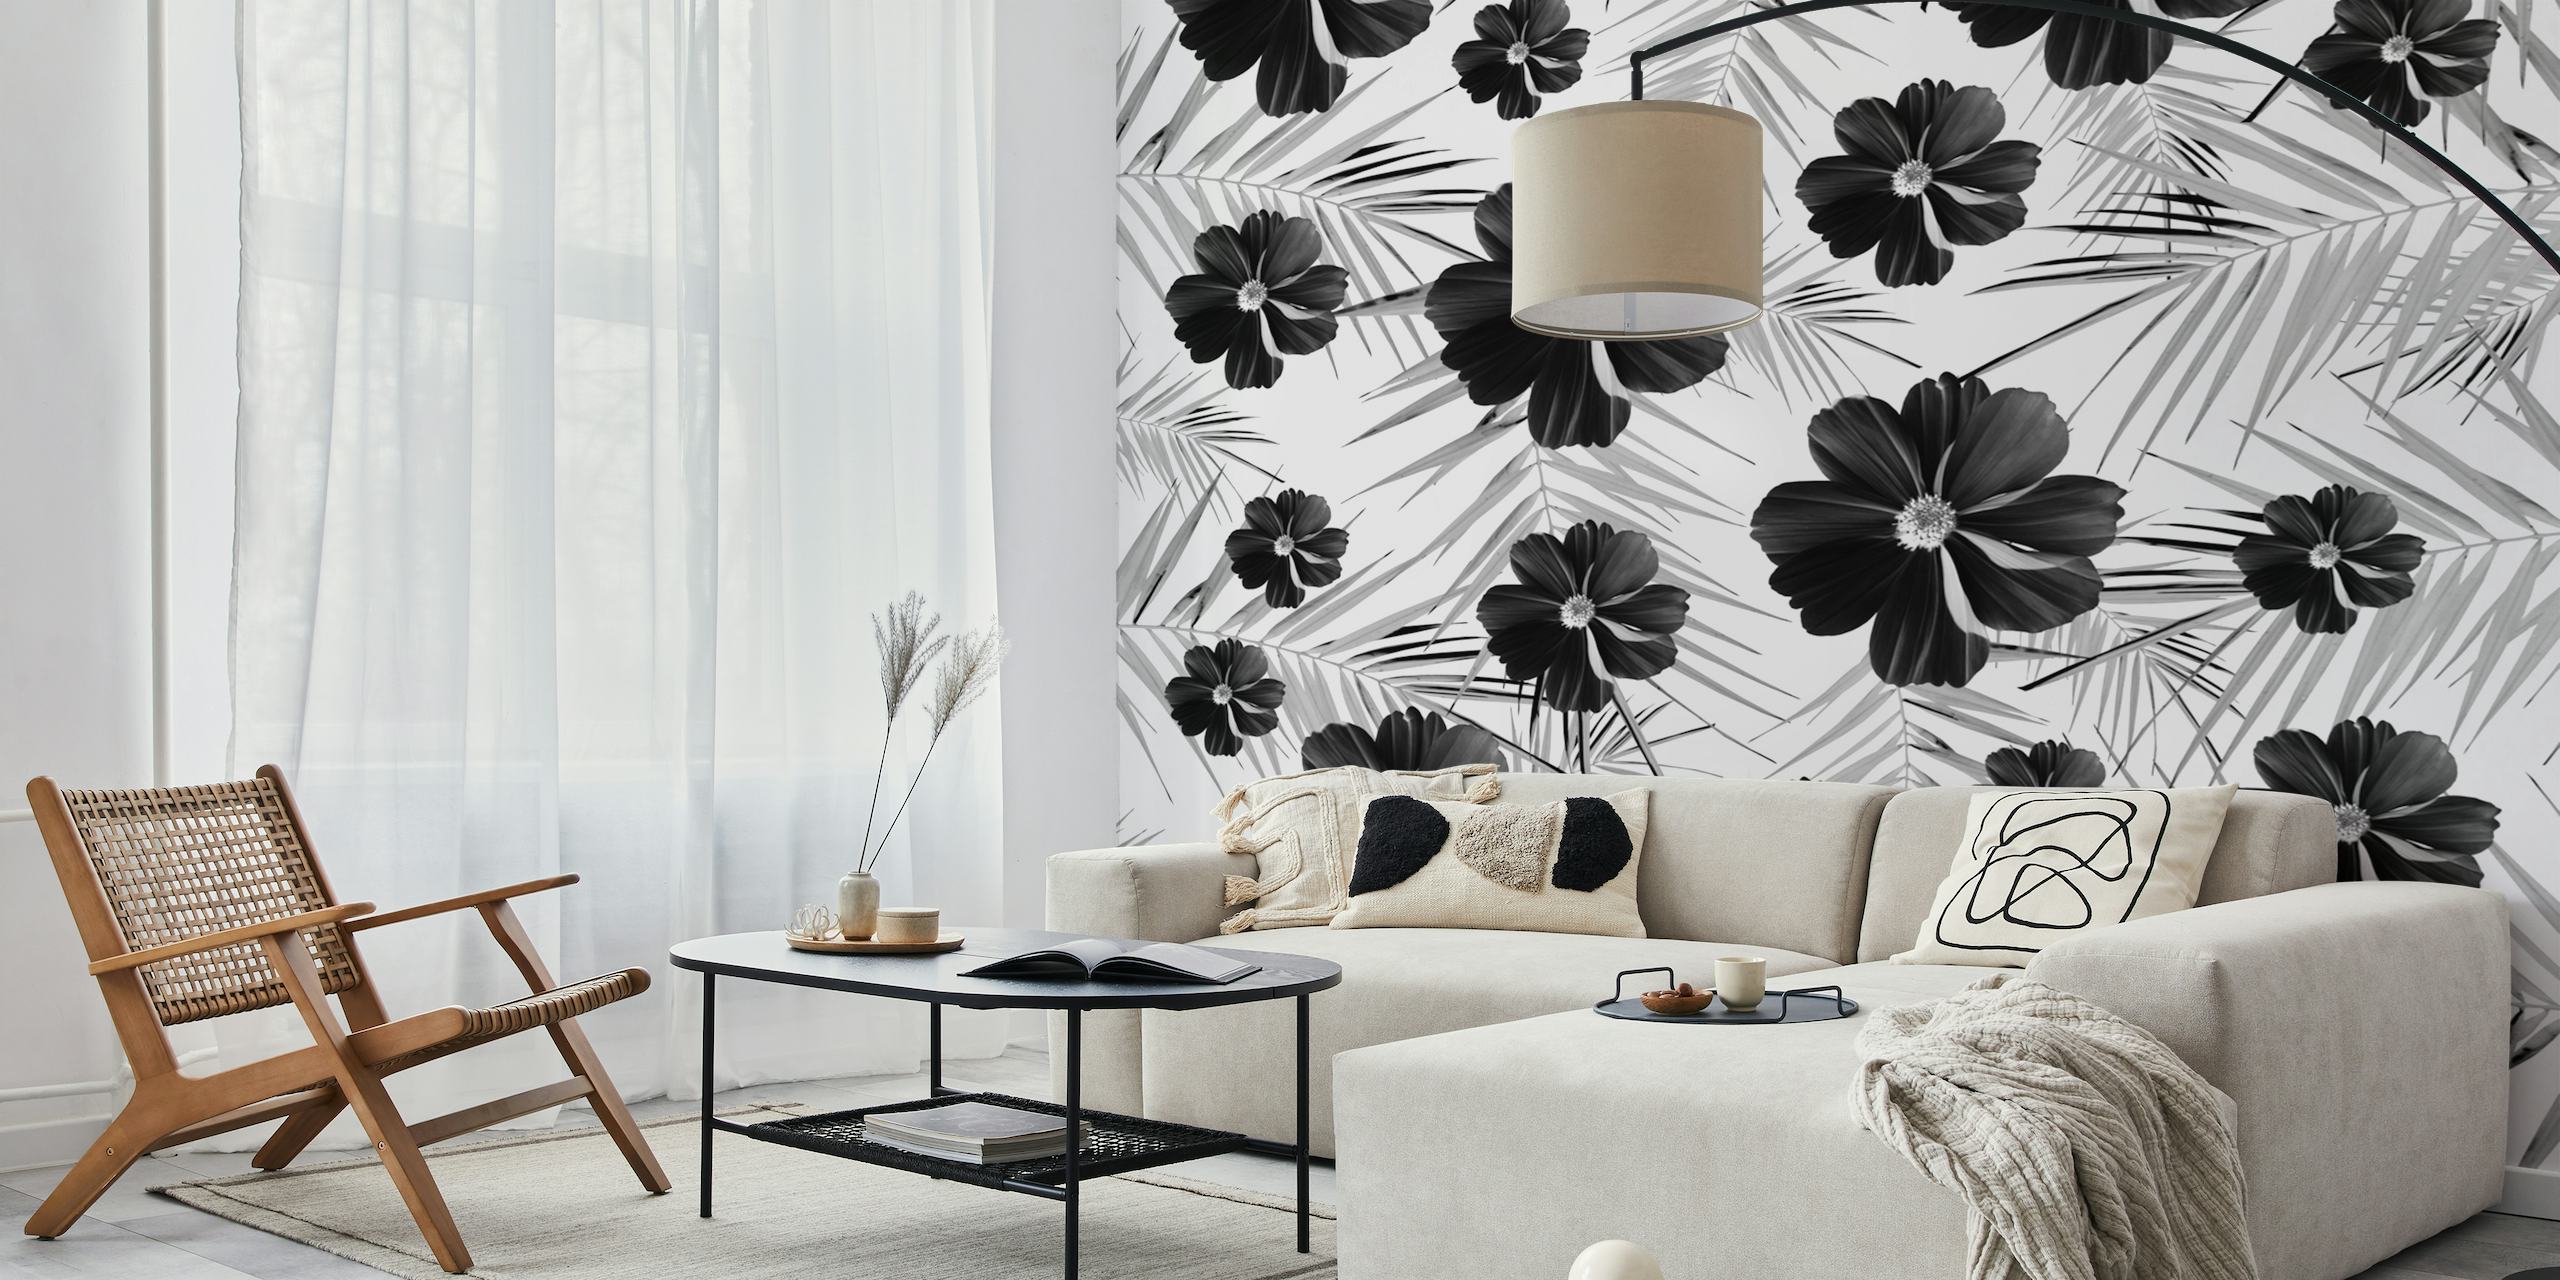 Black and white floral wall mural design with diamond patterns.